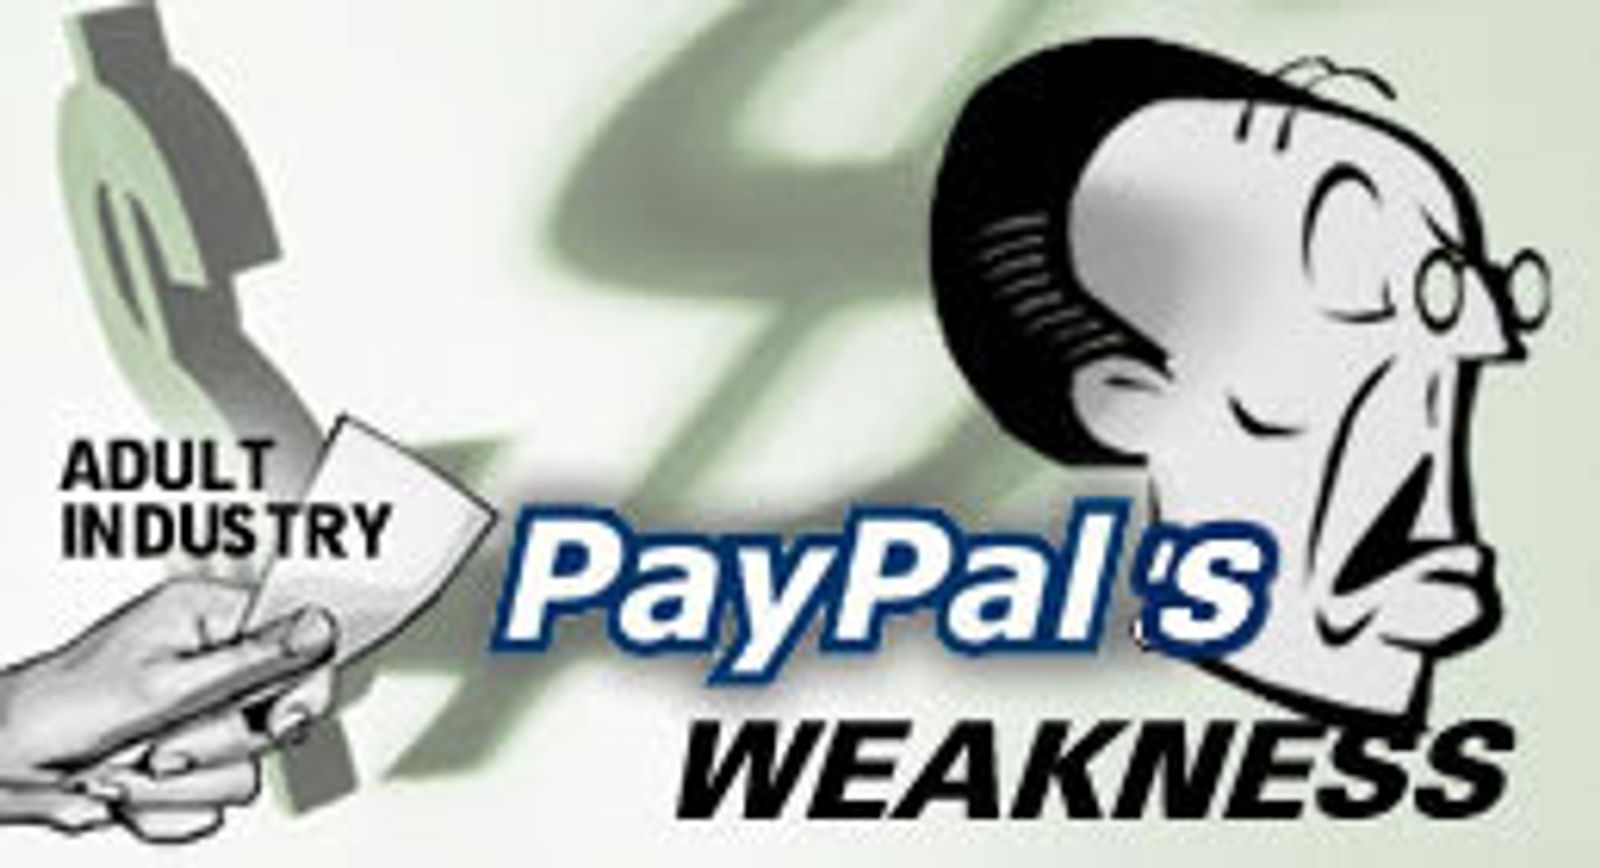 PayPal's Weakness A Lack of Diversity: Analysis